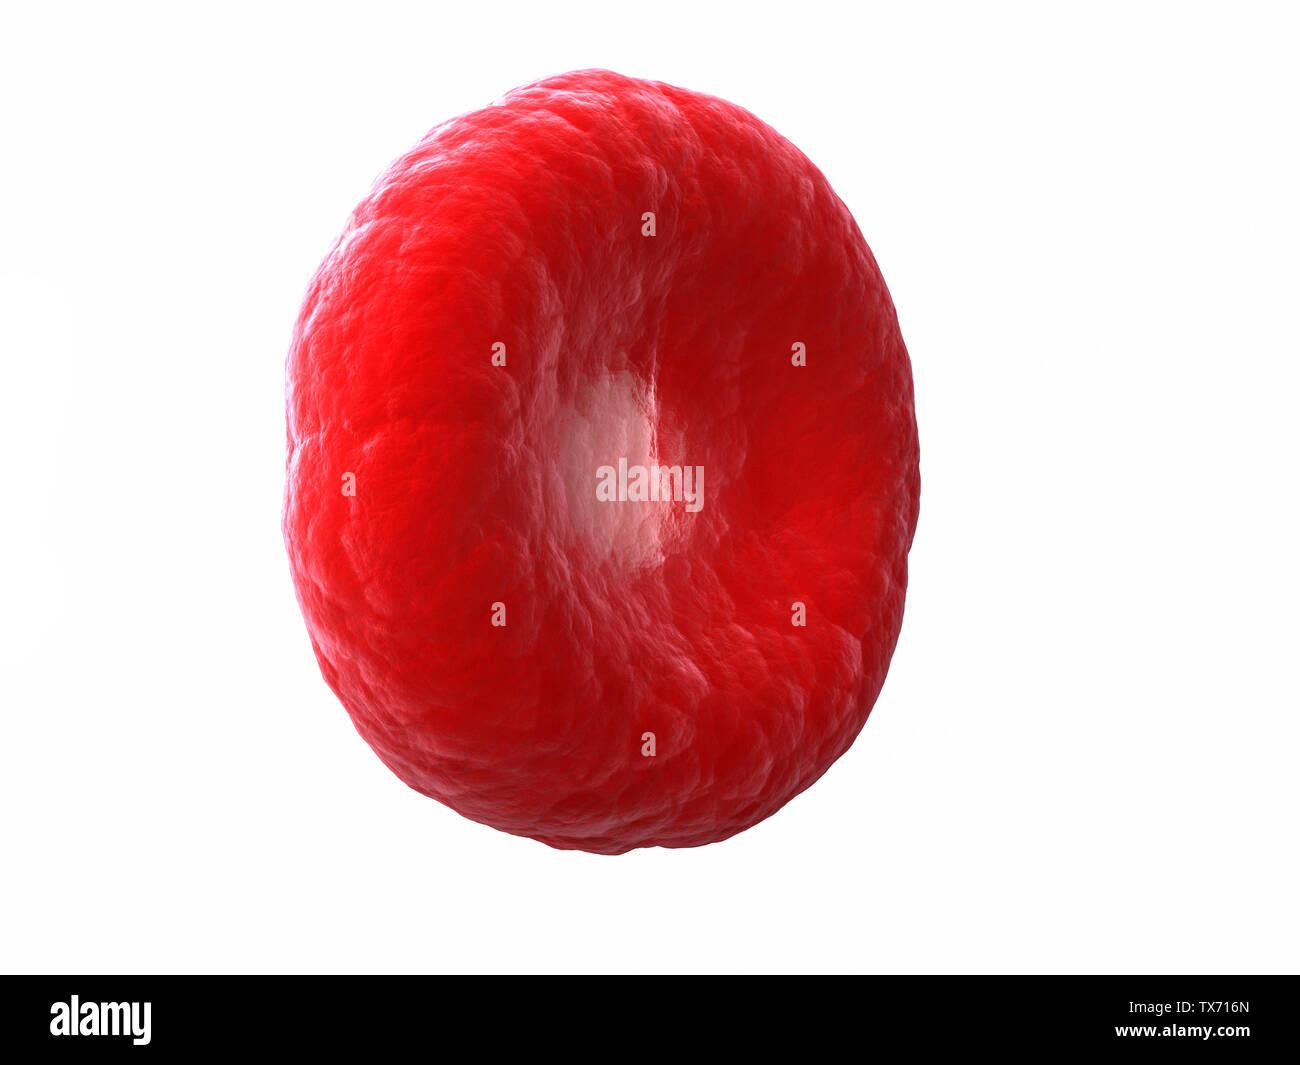 3d rendered medically accurate illustration of a human blood cell Stock Photo